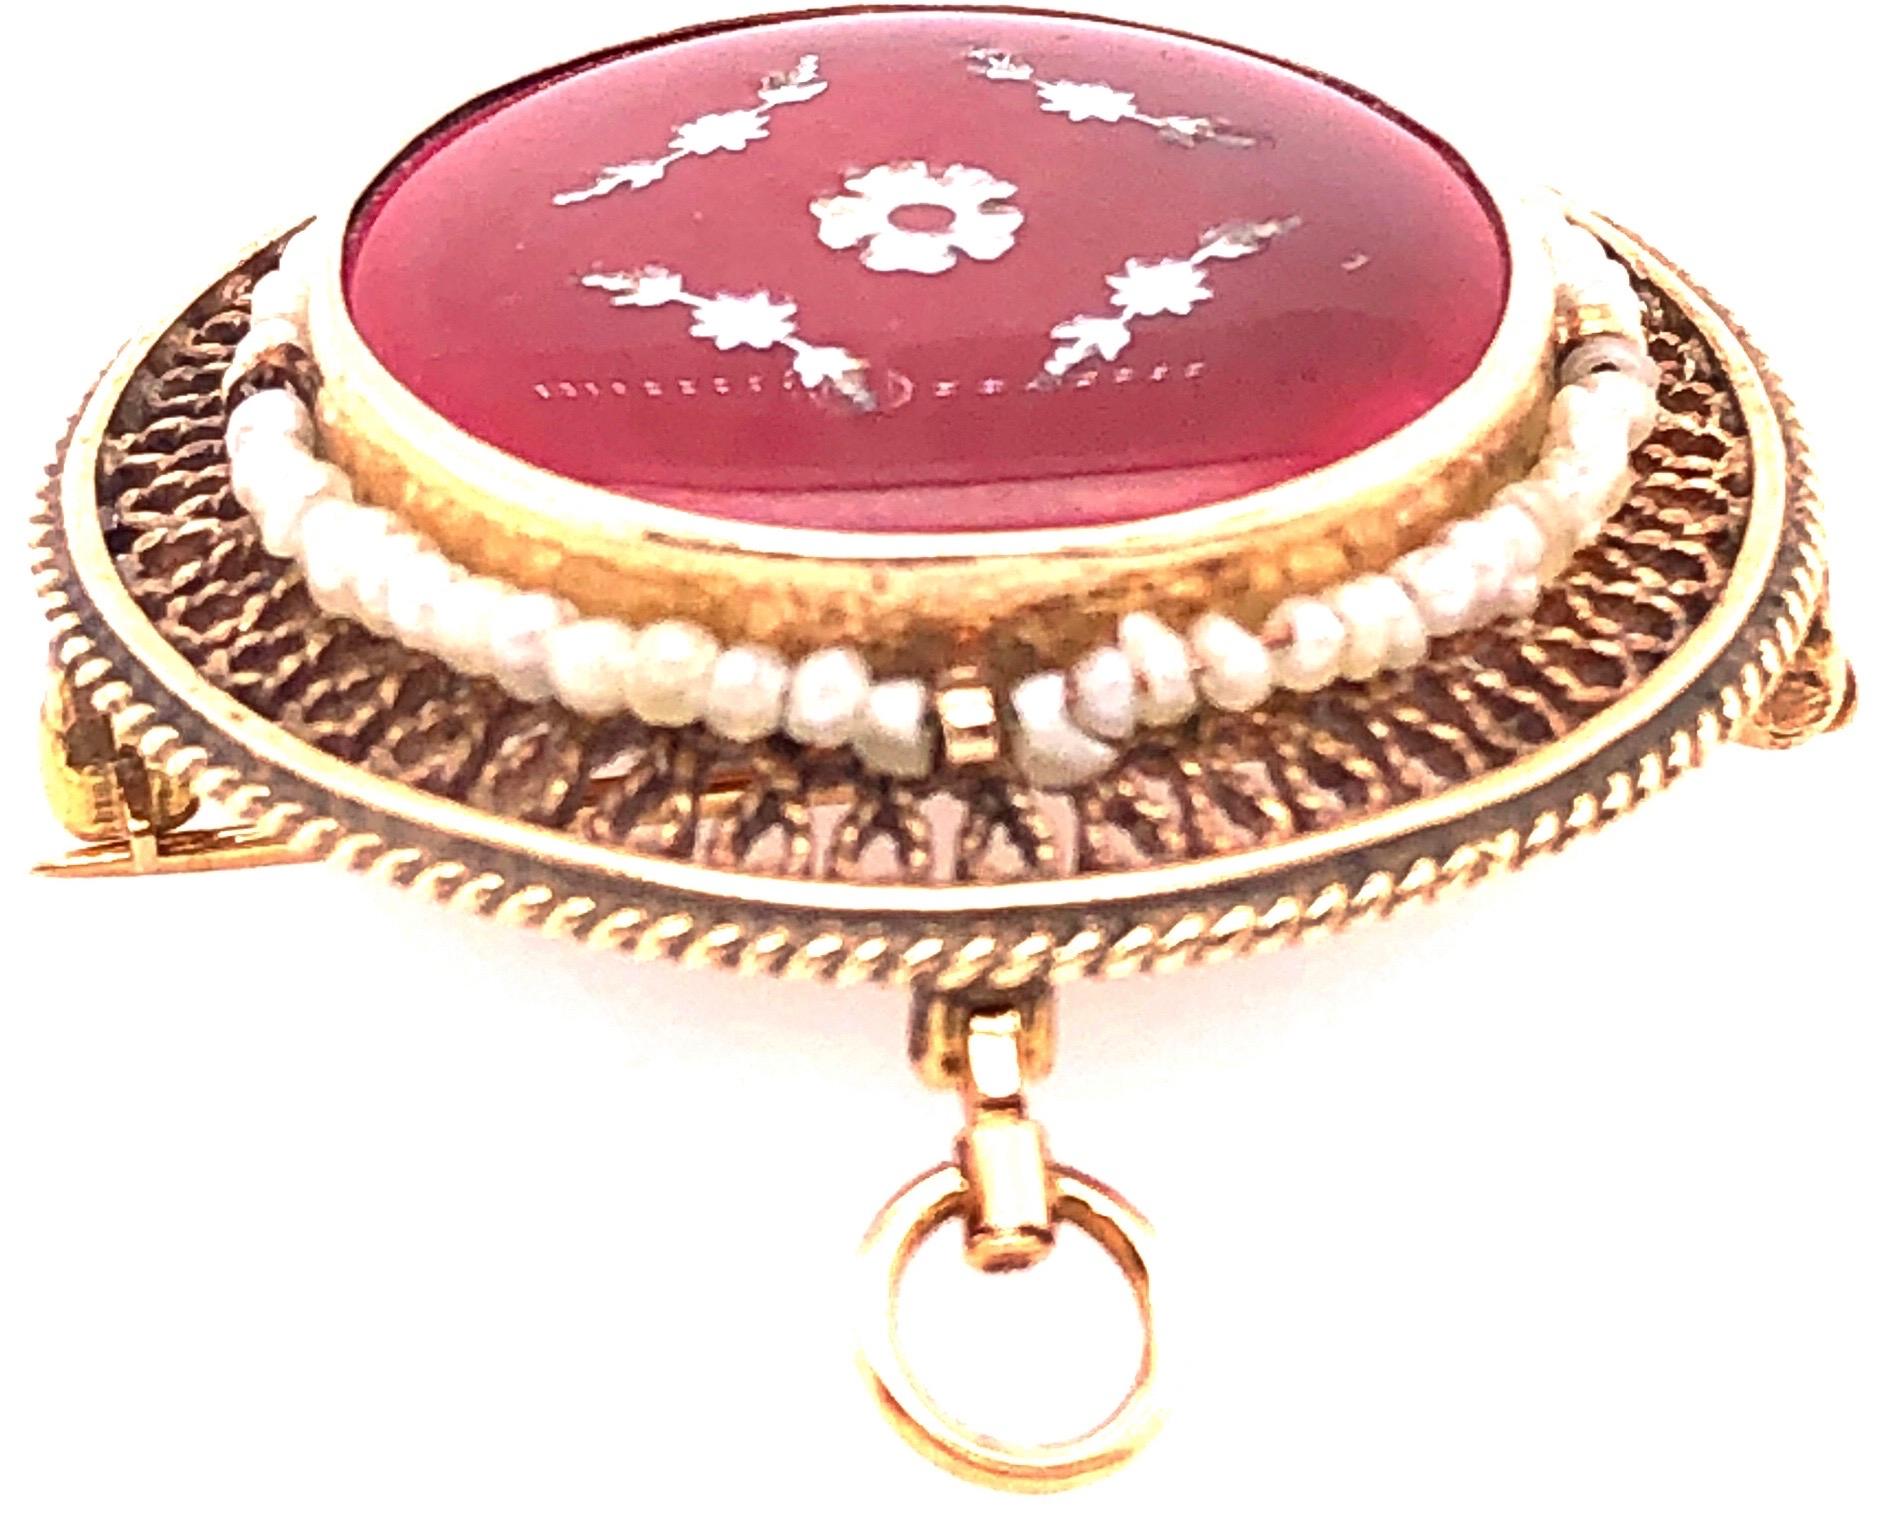 14 Karat Contemporary Brooch and Pendant with Pearls.
64 piece round pearls.
8 grams total weight.